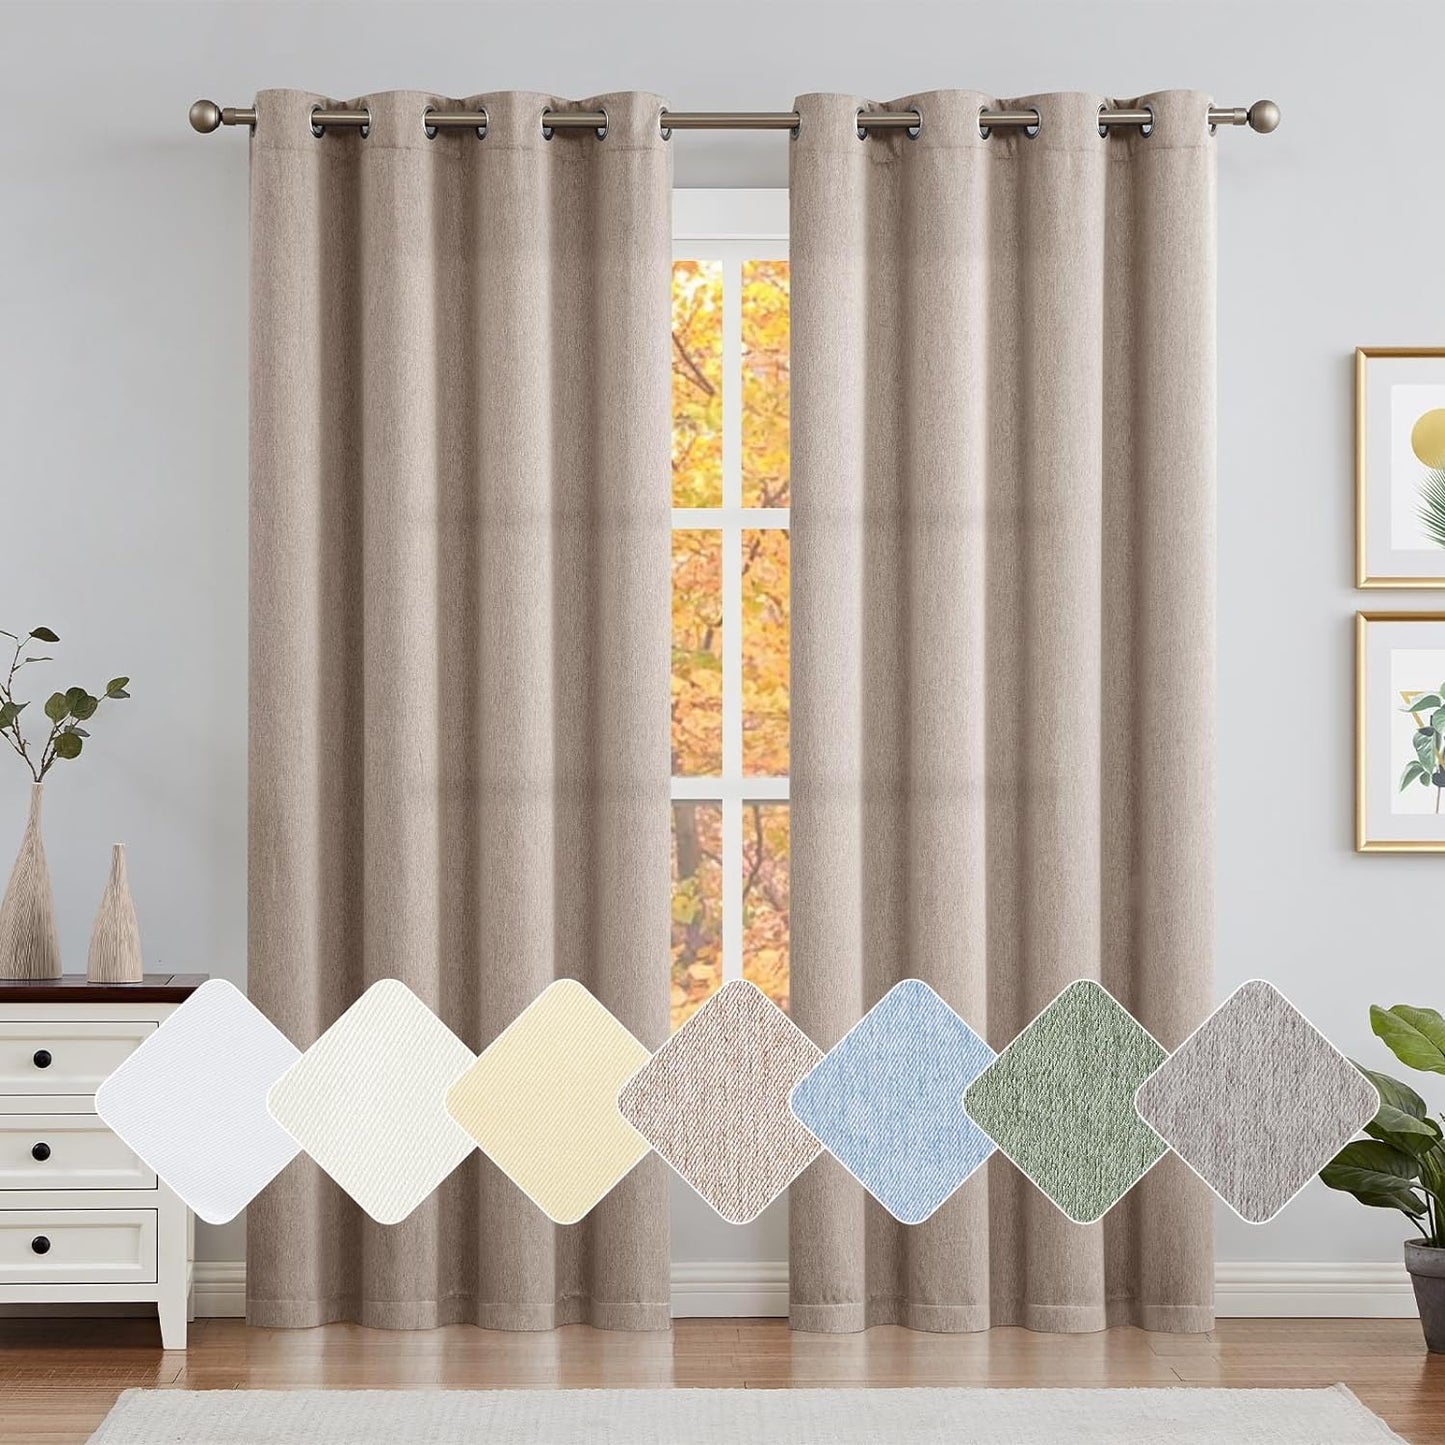 Jinchan Curtains for Bedroom Living Room 84 Inch Long Room Darkening Farmhouse Country Window Curtains Heathered Denim Blue Curtains Grommet Curtains Drapes 2 Panels  CKNY HOME FASHION *Taupe 50"W X 84"L 